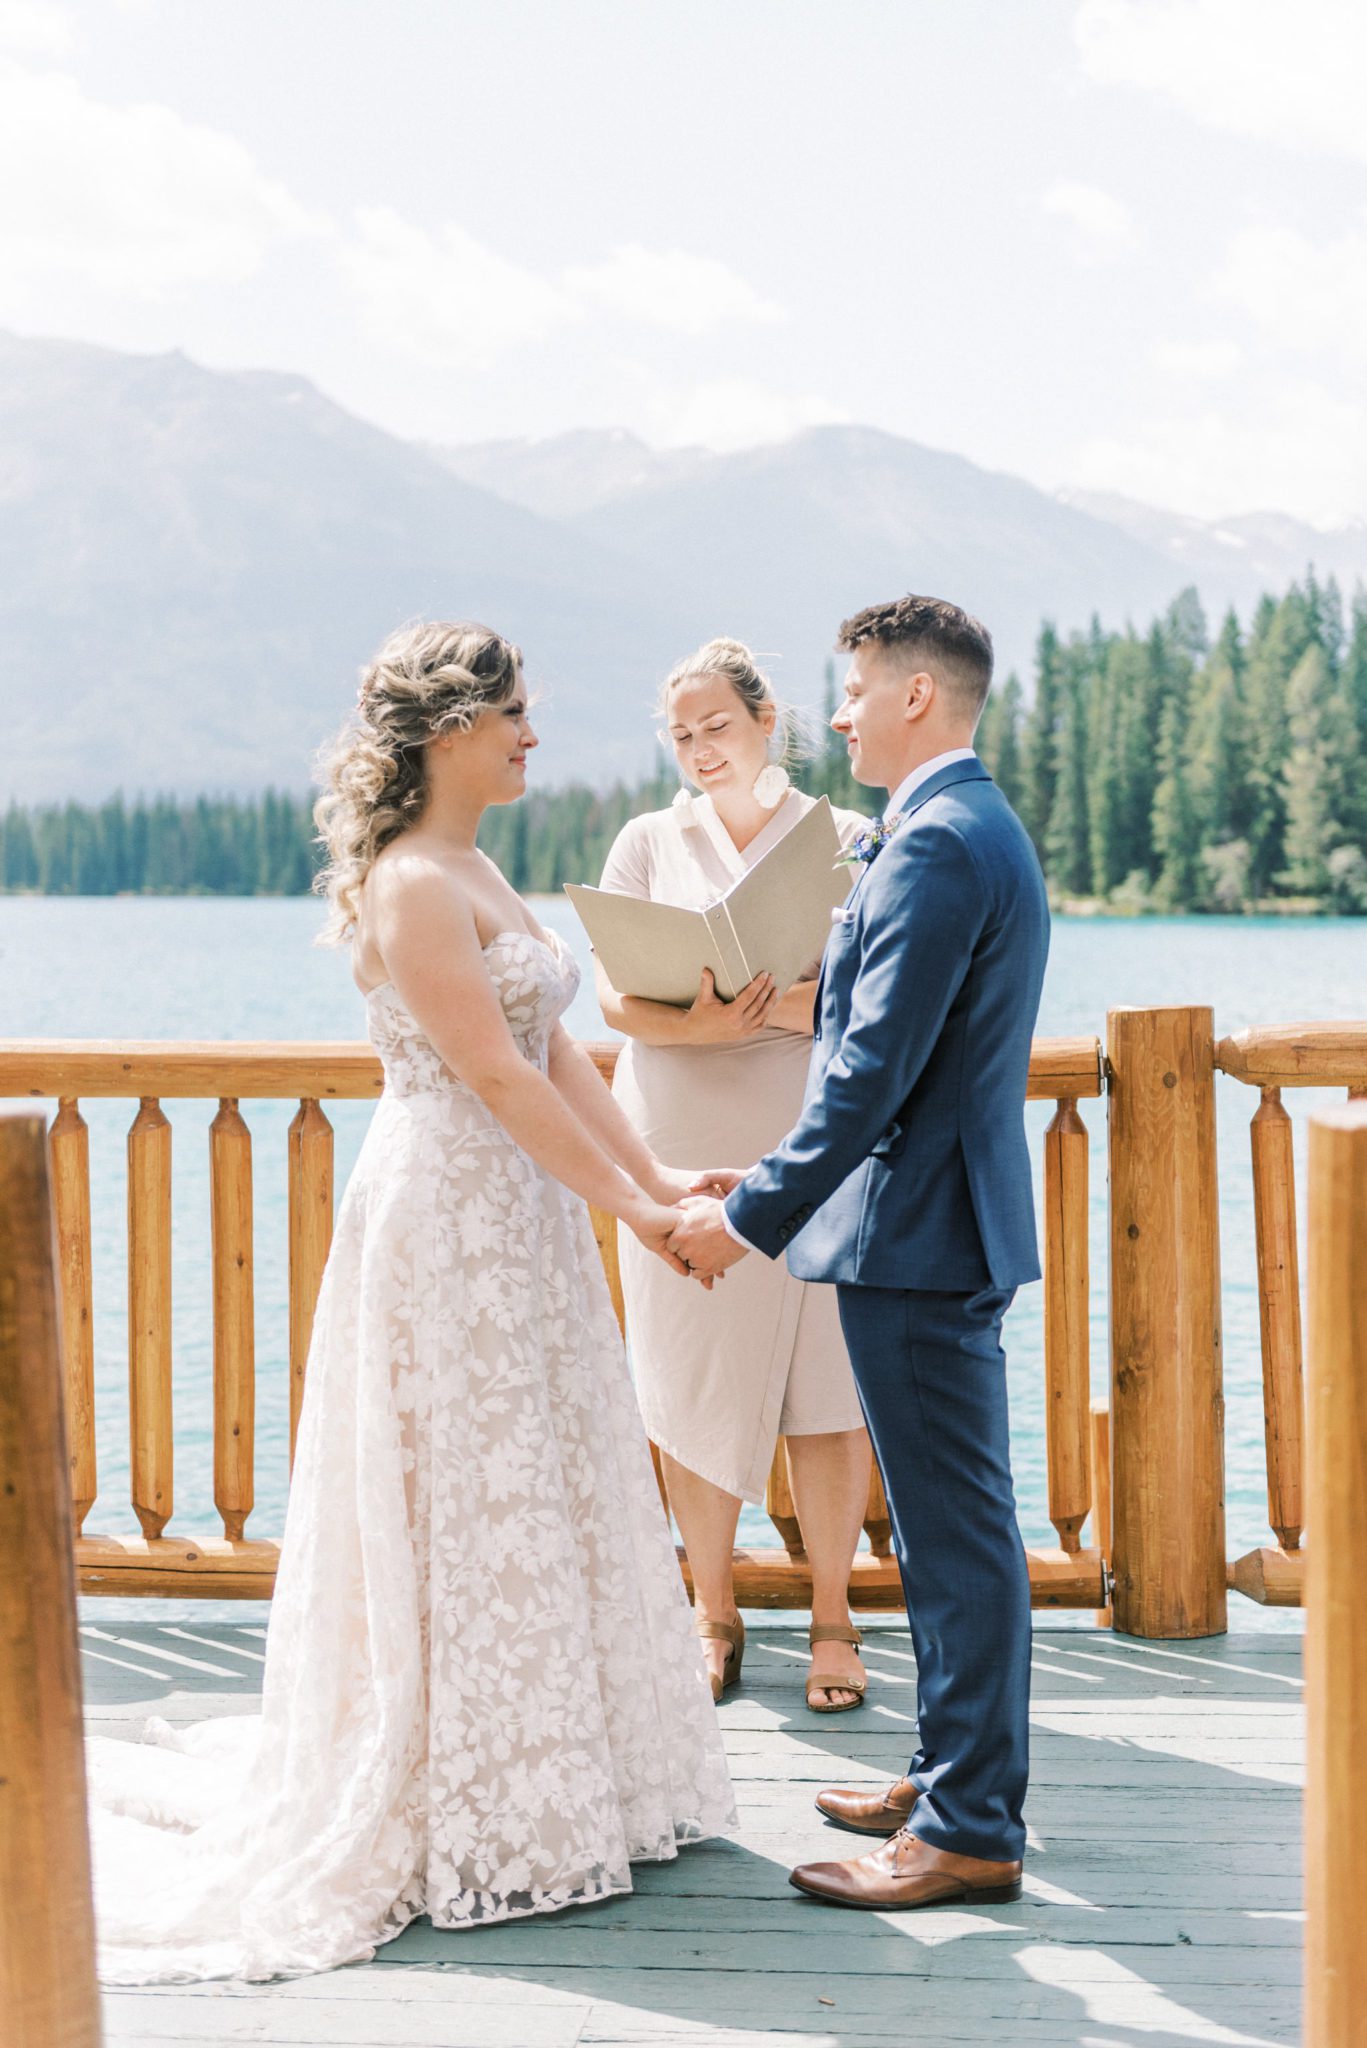 Getting Ready Together Never Looked So Good! An Intimate Mountain Elopement at the Fairmont Jasper Park Lodge Featured by Brontë Bride